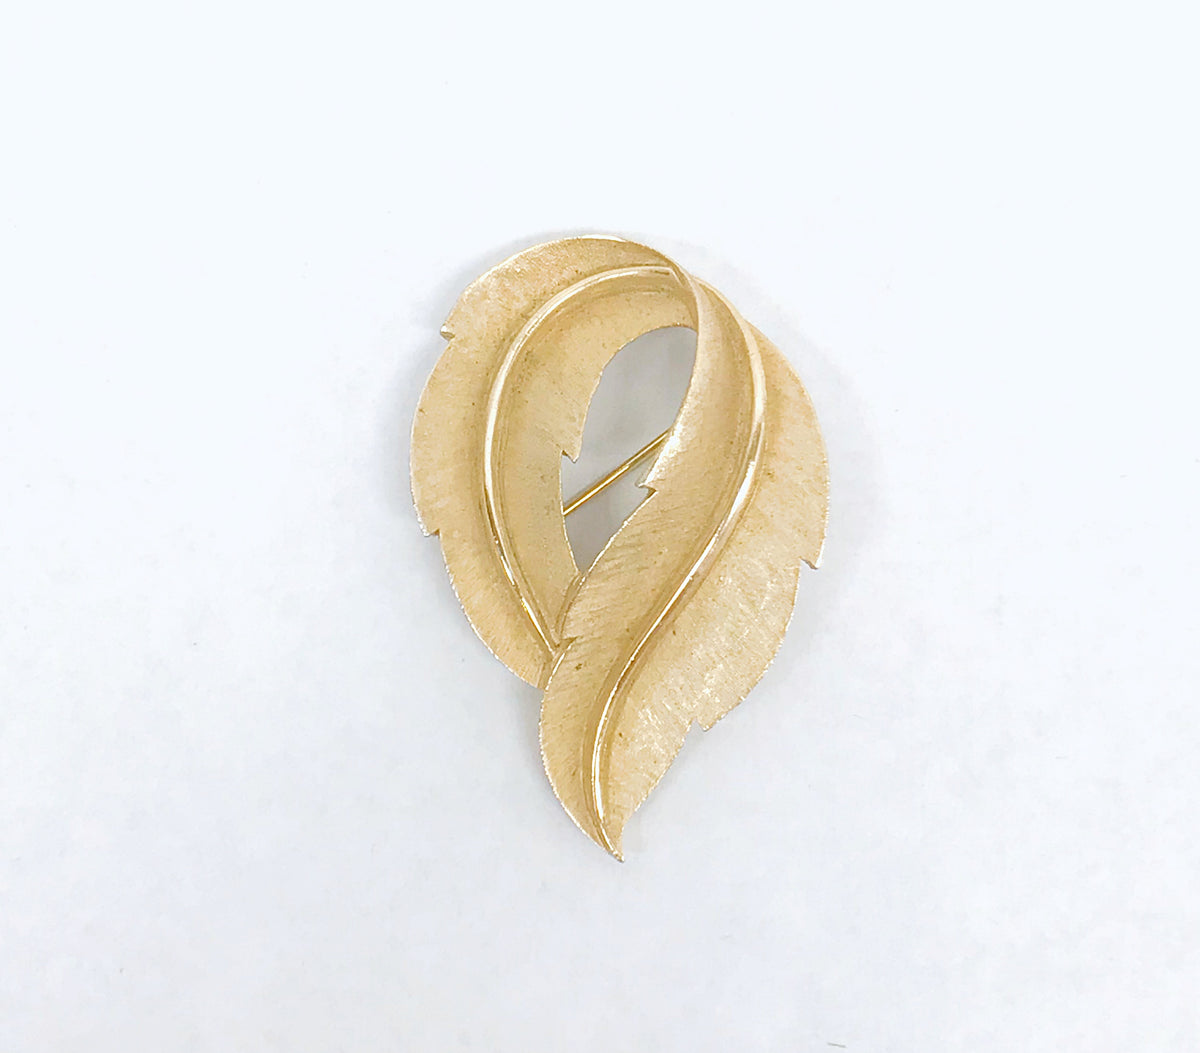 Trifari© Textured Gold Tone Leaf Brooch Pin - Hers and His Treasures